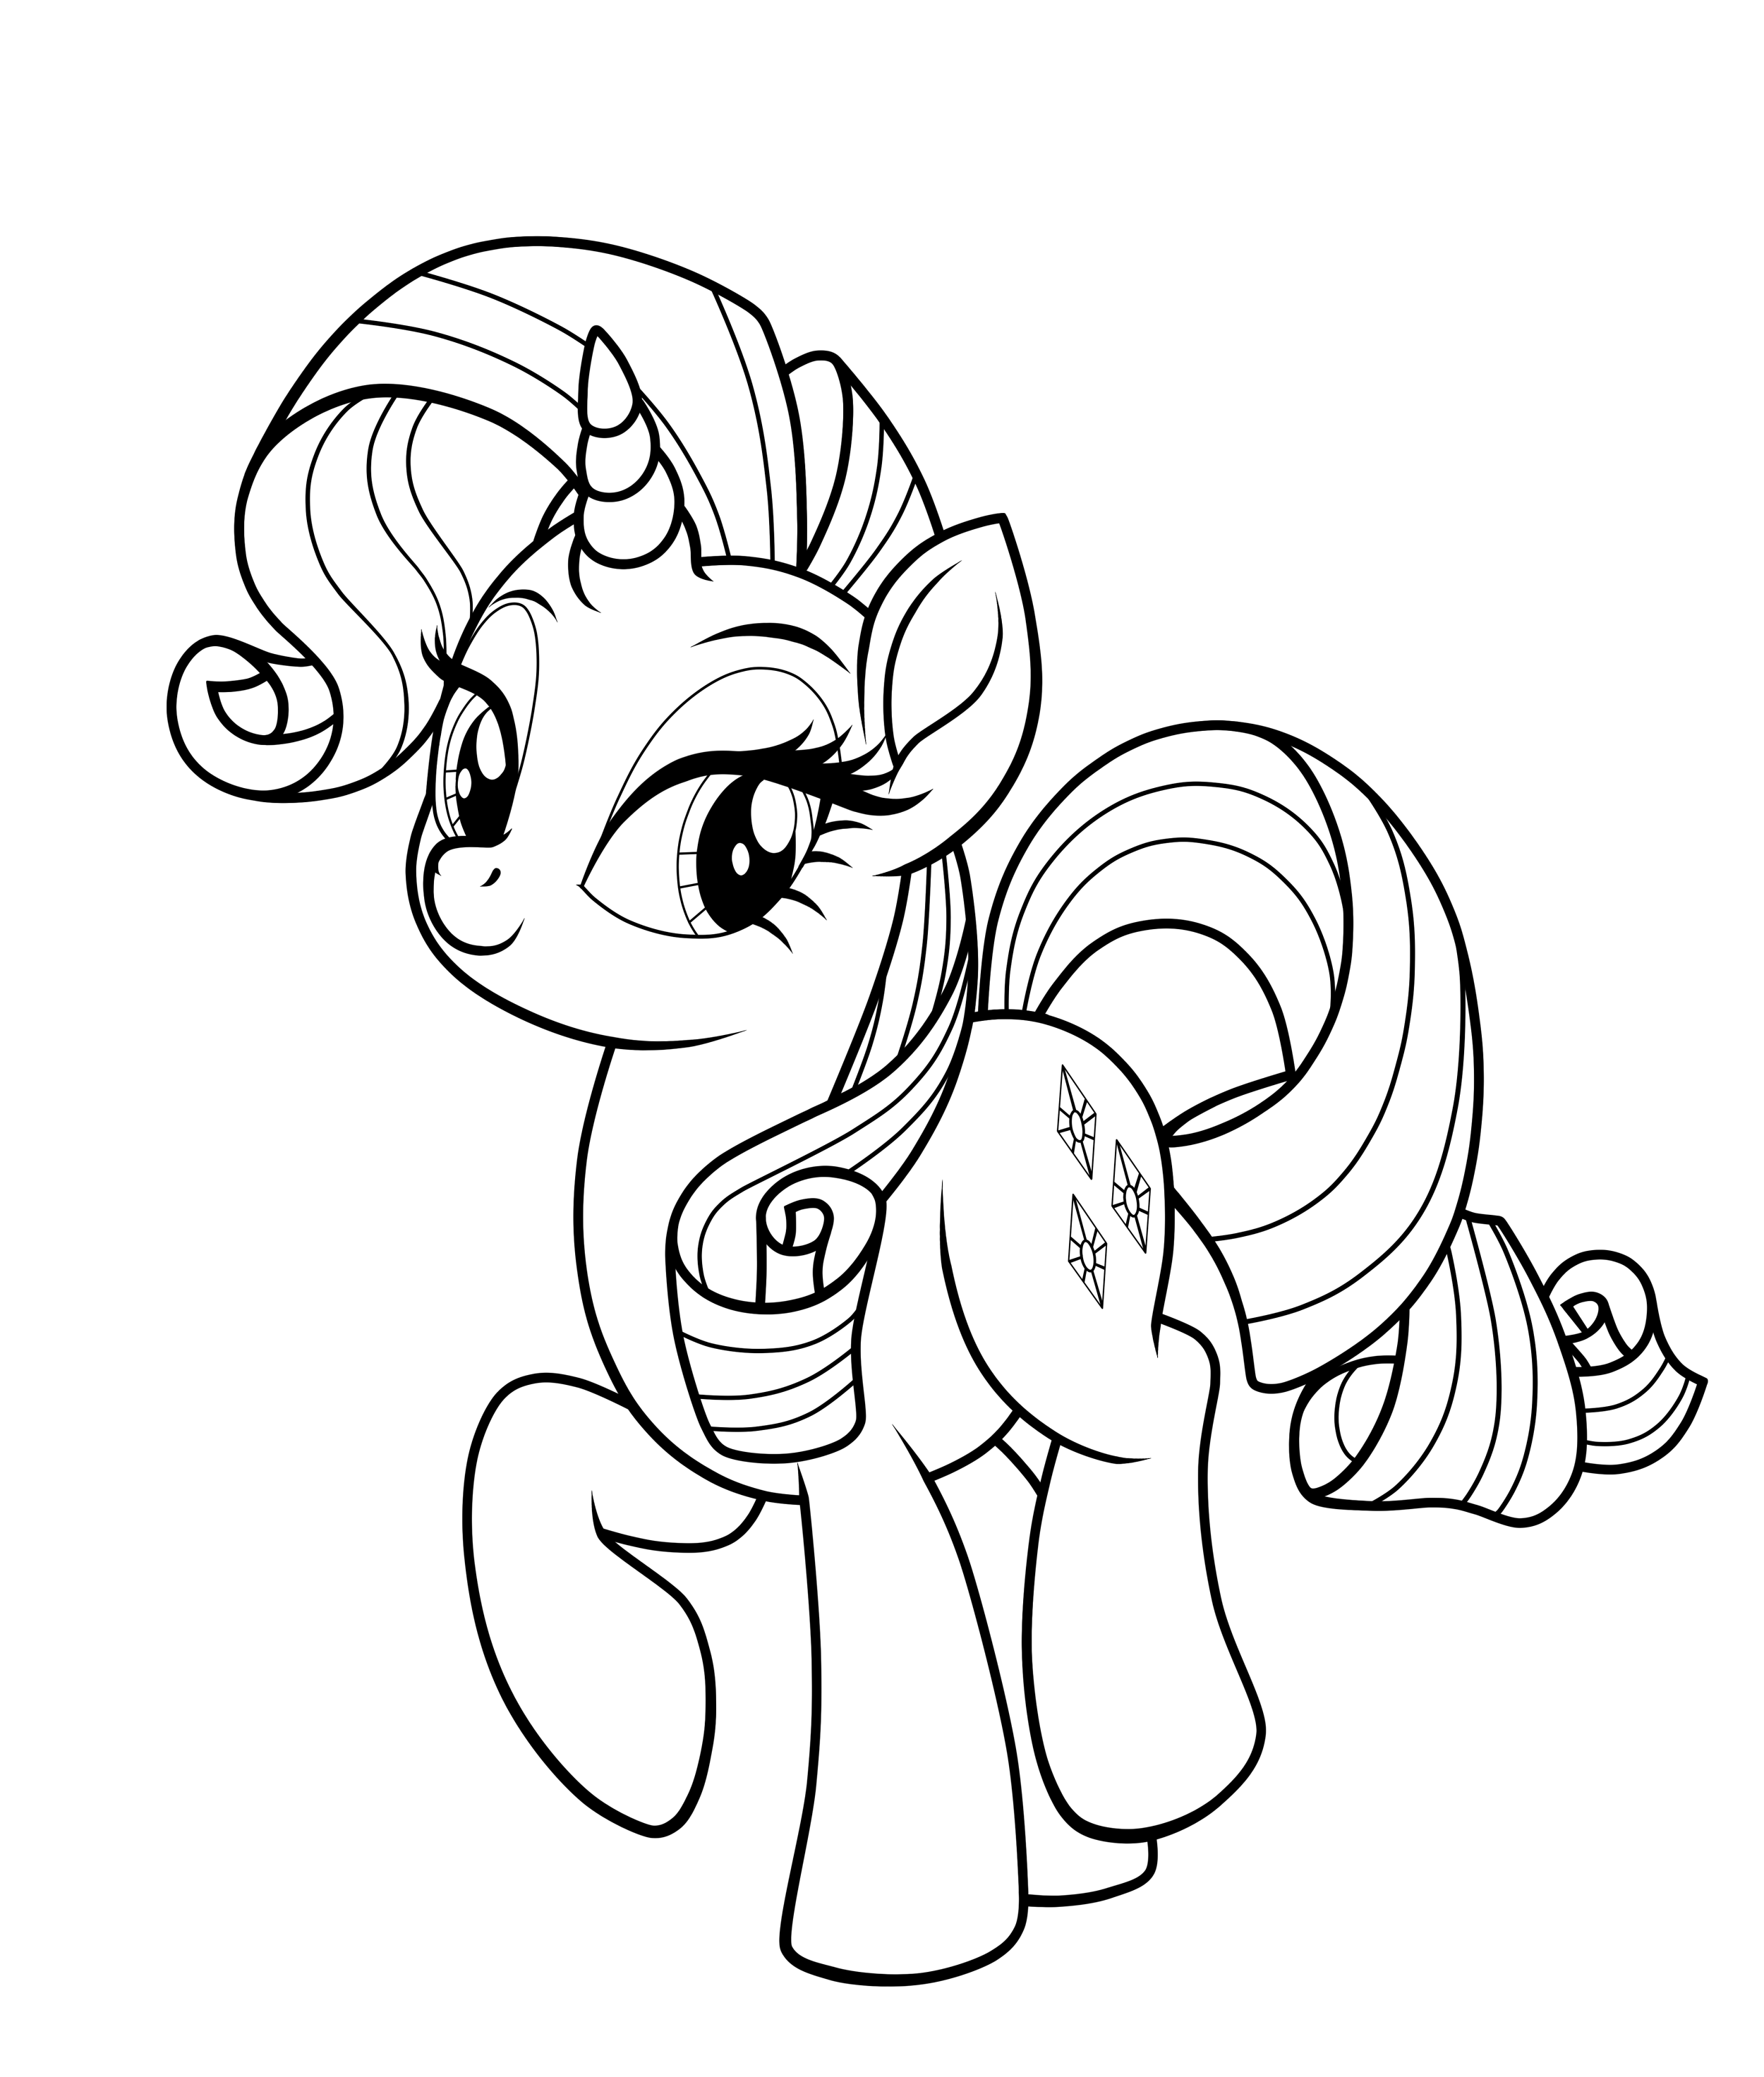 Mlp rarity for coloring by theretroart on